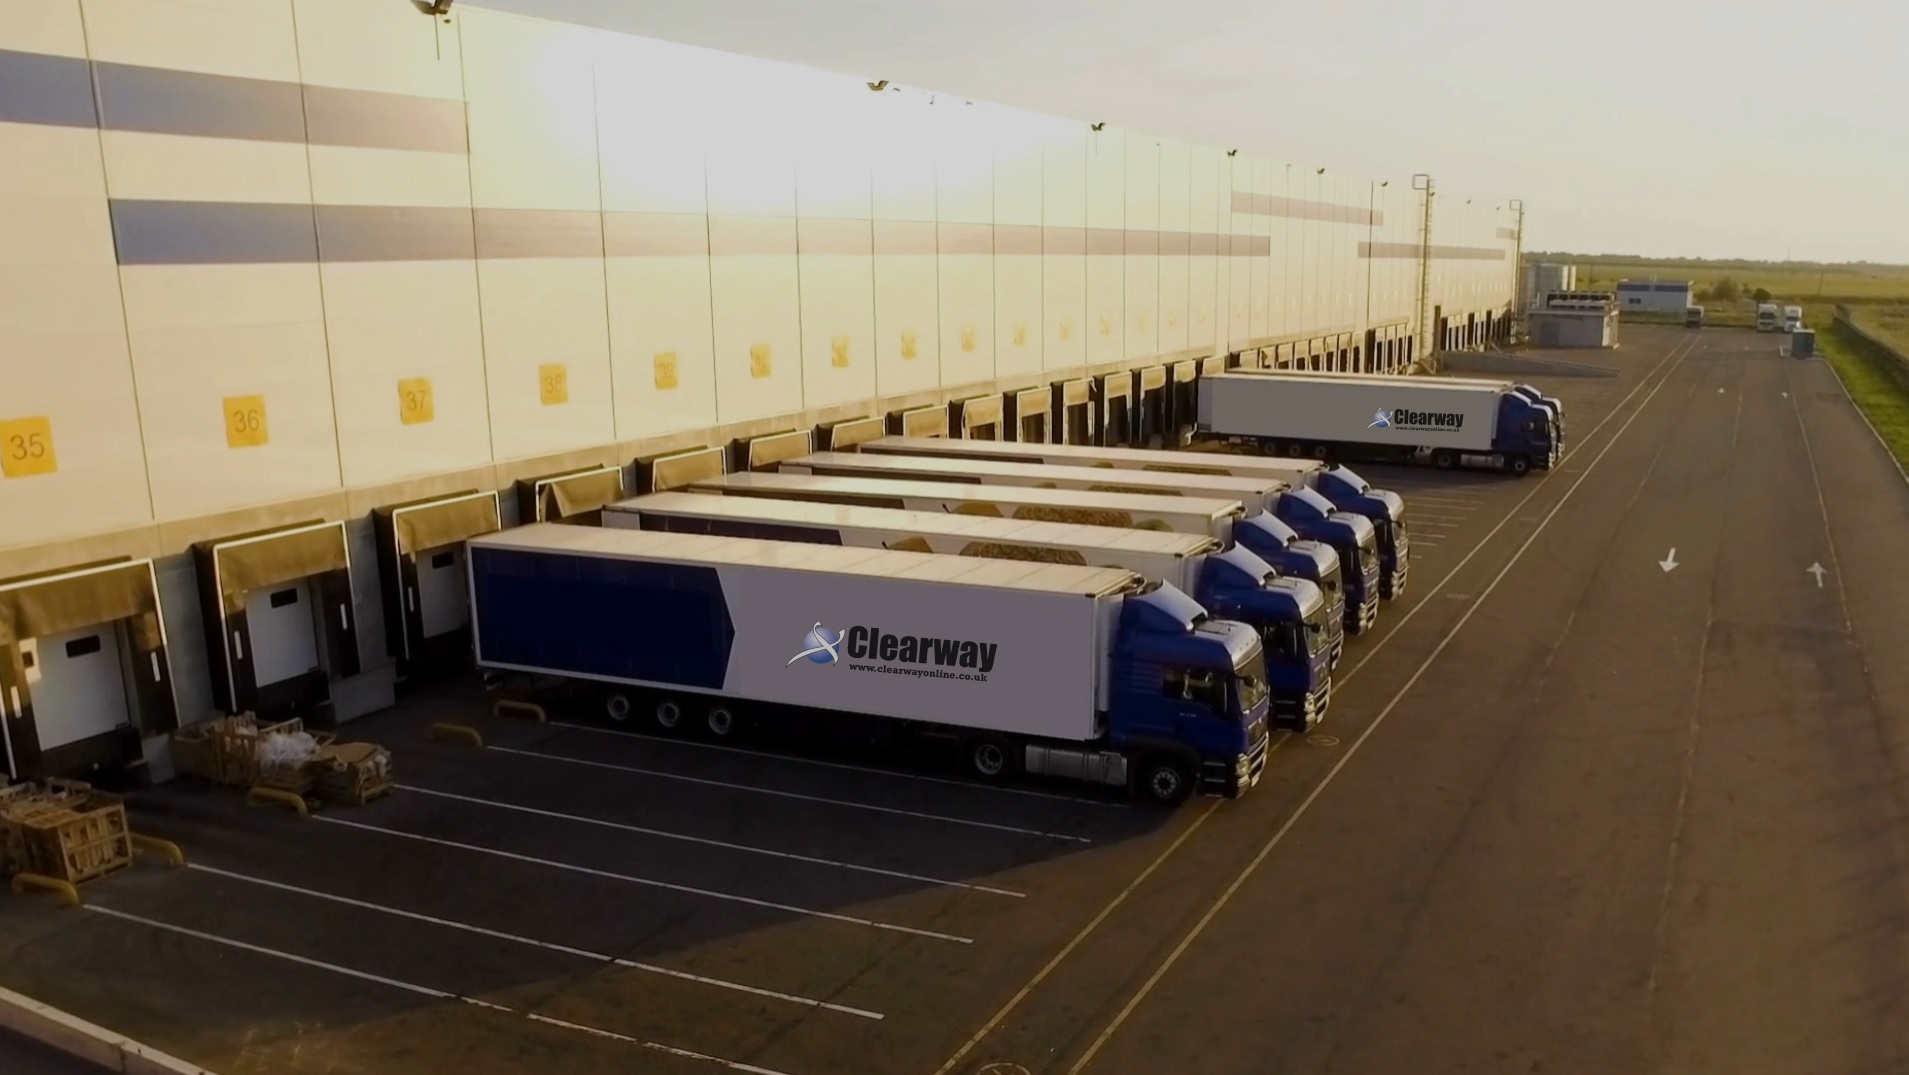 Clearway lorries outside a factory with branding on the trucks